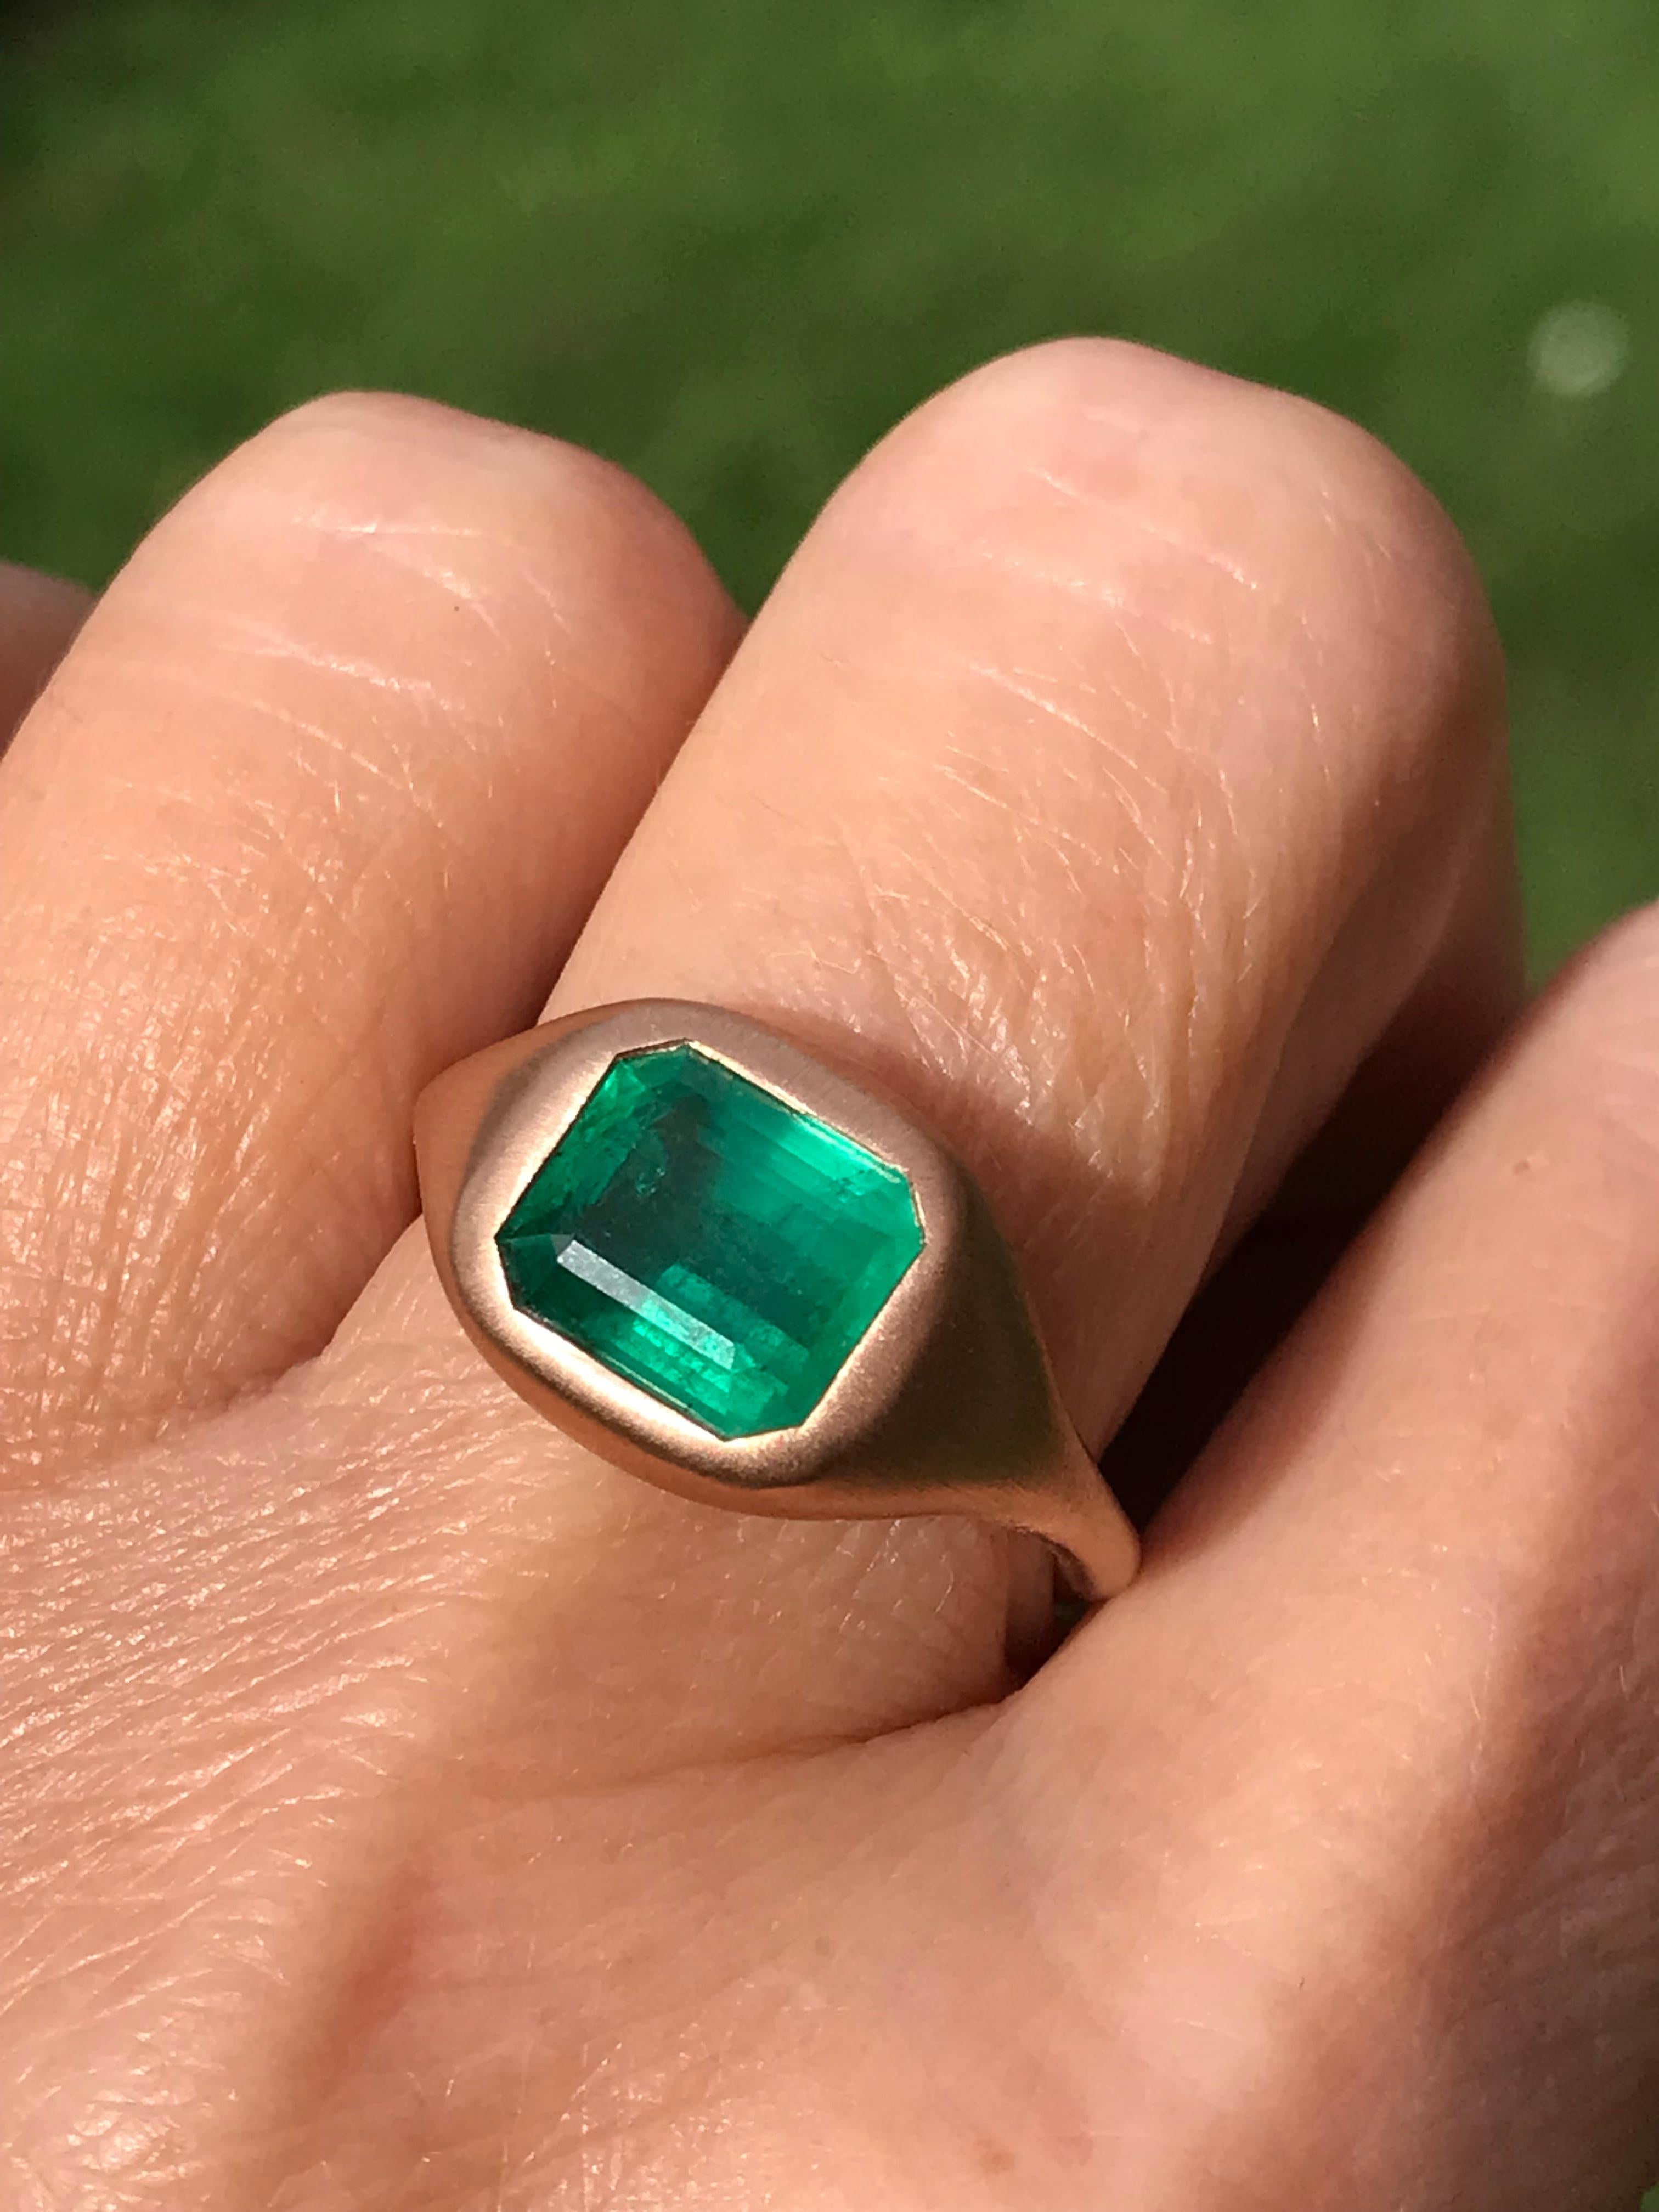 Dalben design One of a Kind 18k rose gold satin finishing ring with a 2,8 carat bezel-set emerald cut emerald. 
Ring size7+ USA , 55 EU  re-sizable to most finger sizes. 
Bezel stone dimensions :
width 12,5 mm
height 11,3 mm
The ring has been